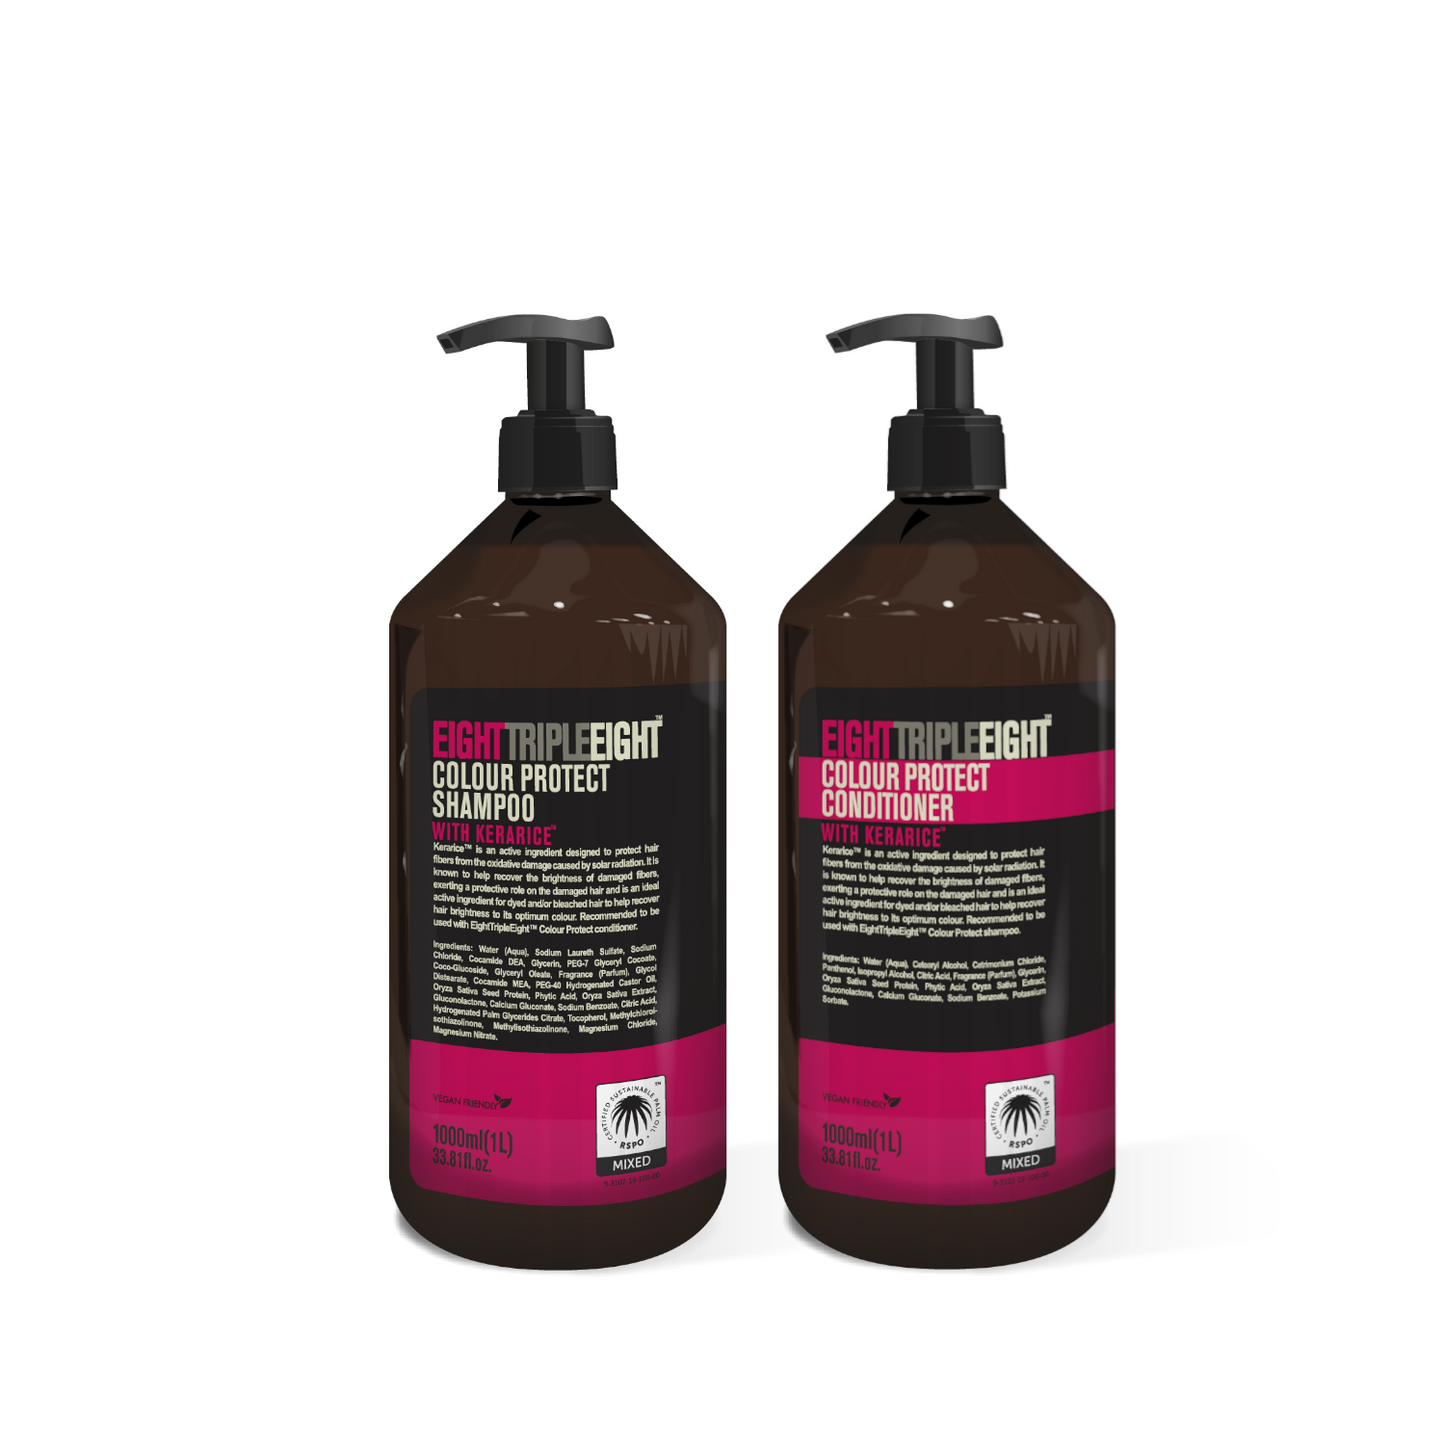 EightTripleEight Colour Protect With Kerarice Set- 1L Shampoo & 1L Conditioner